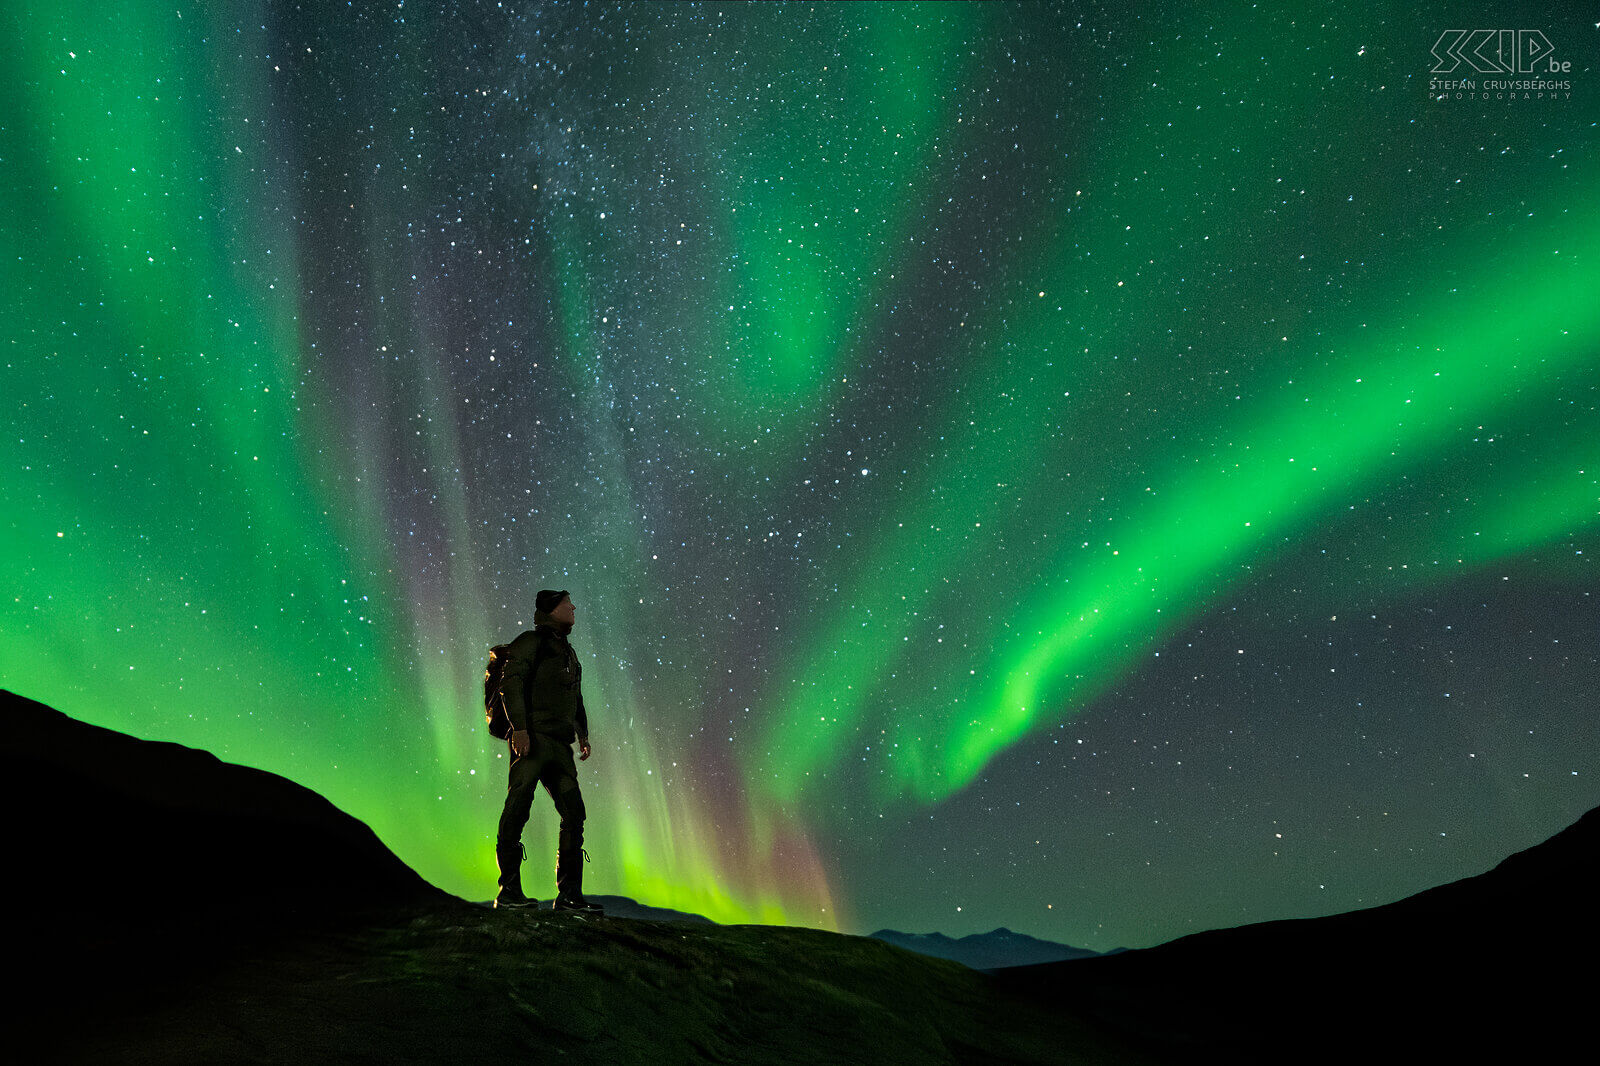 Norway - Storsteinnes - Northern lights - Selfie Last selfie with some northern lights. The last and unforgettable night in the far north and the end of a beautiful photography trip Stefan Cruysberghs